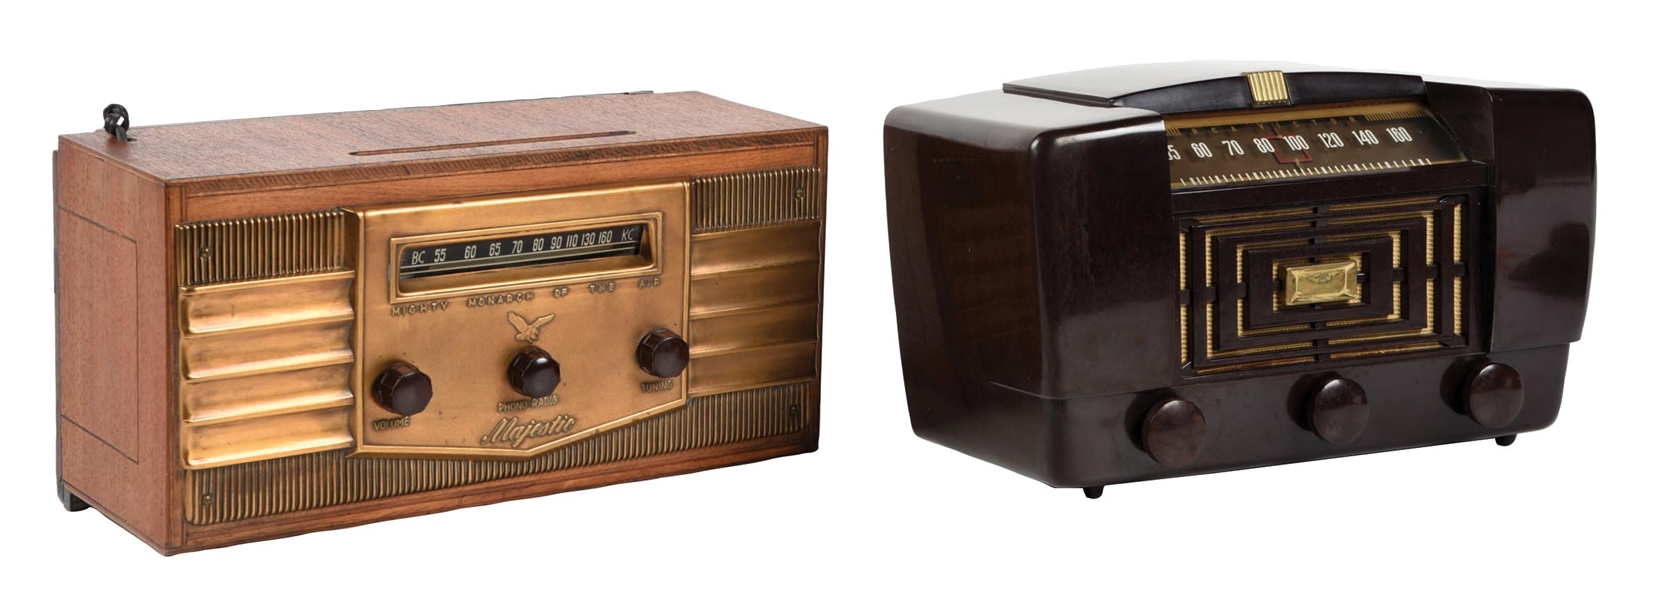 COLLECTION OF 2 EARLY RADIOS